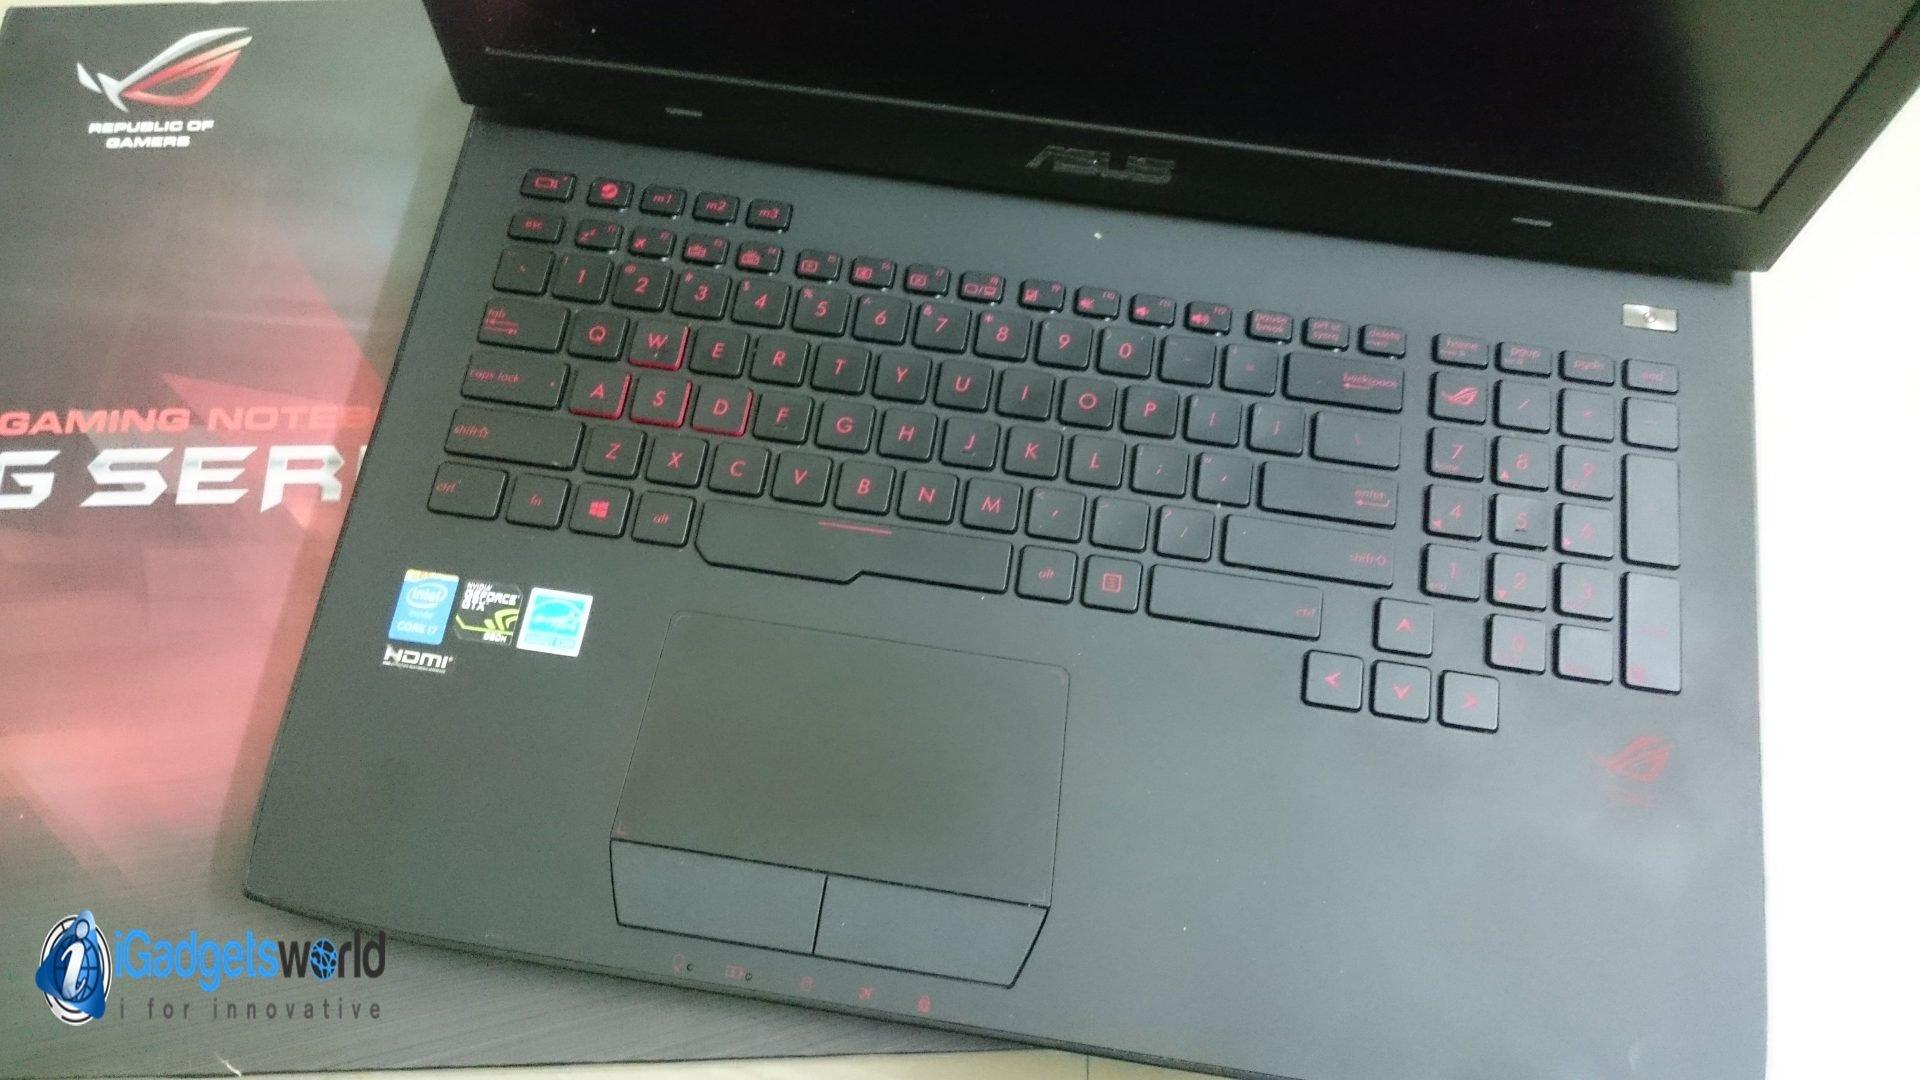 Asus ROG G751J Review: A Slightly Overpriced Ultra High-End Gaming Laptop - 23